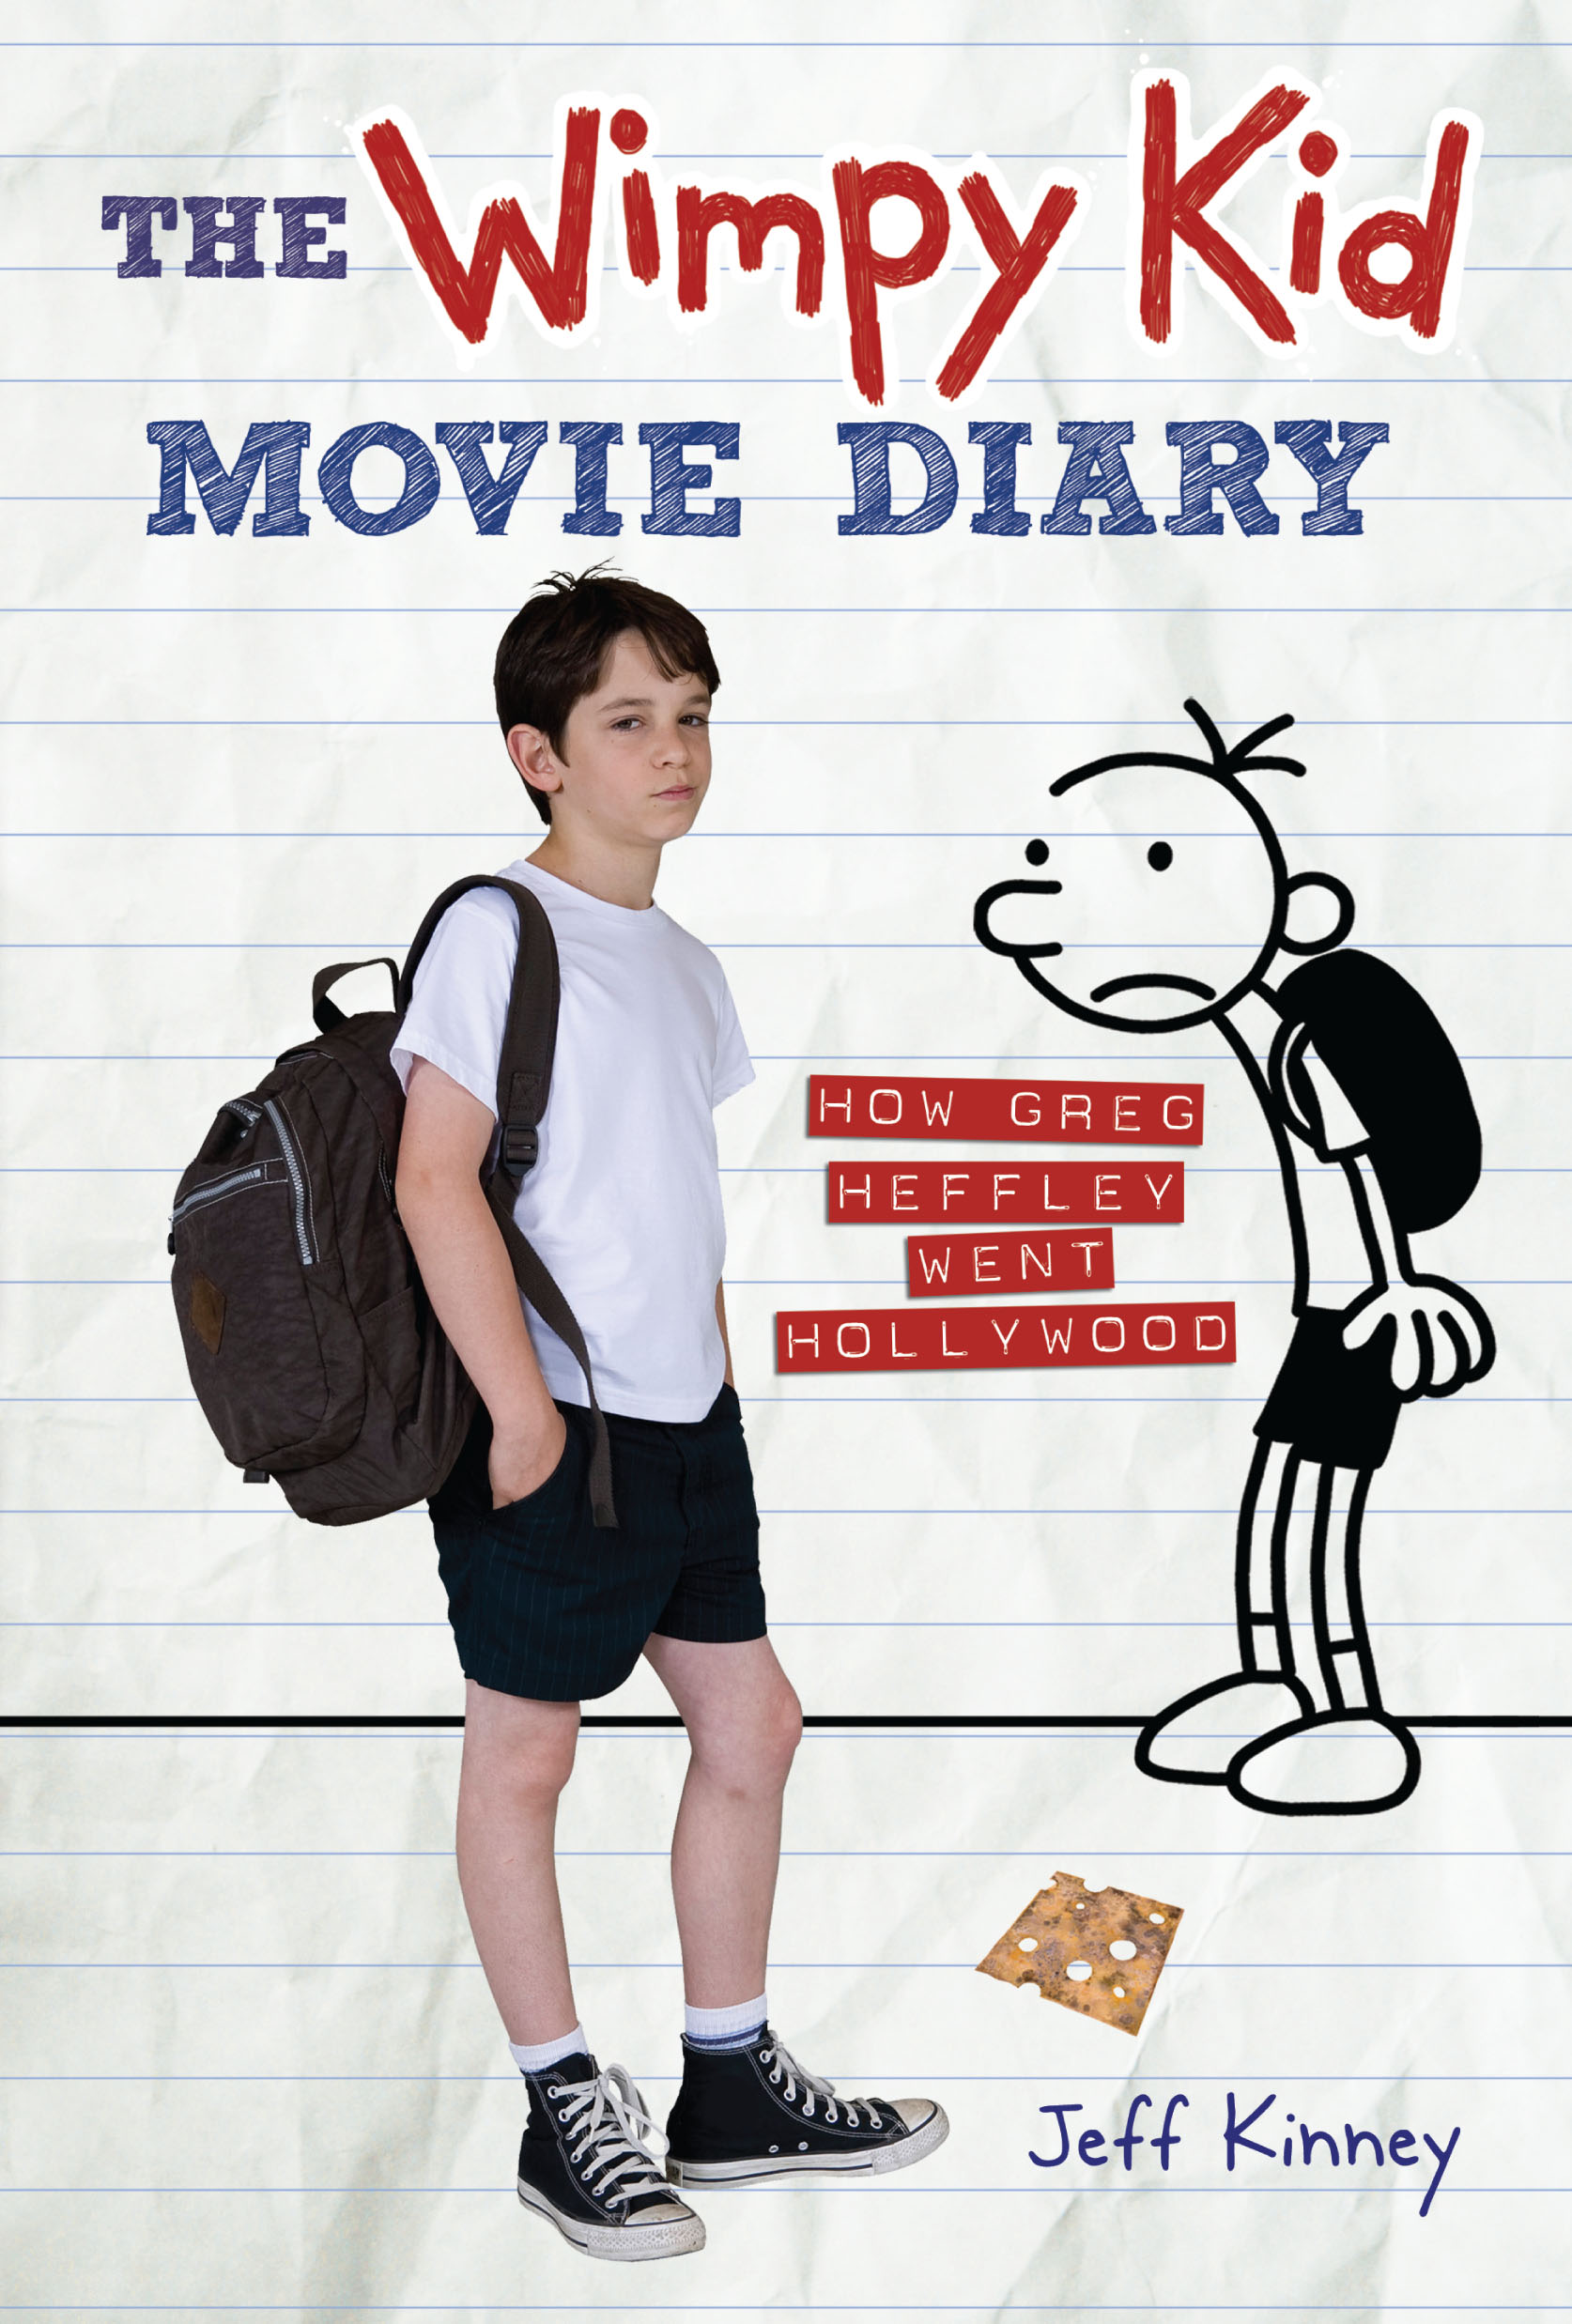 Diary of a Wimpy Kid (BK1) by Jeff Kinney - Penguin Books 